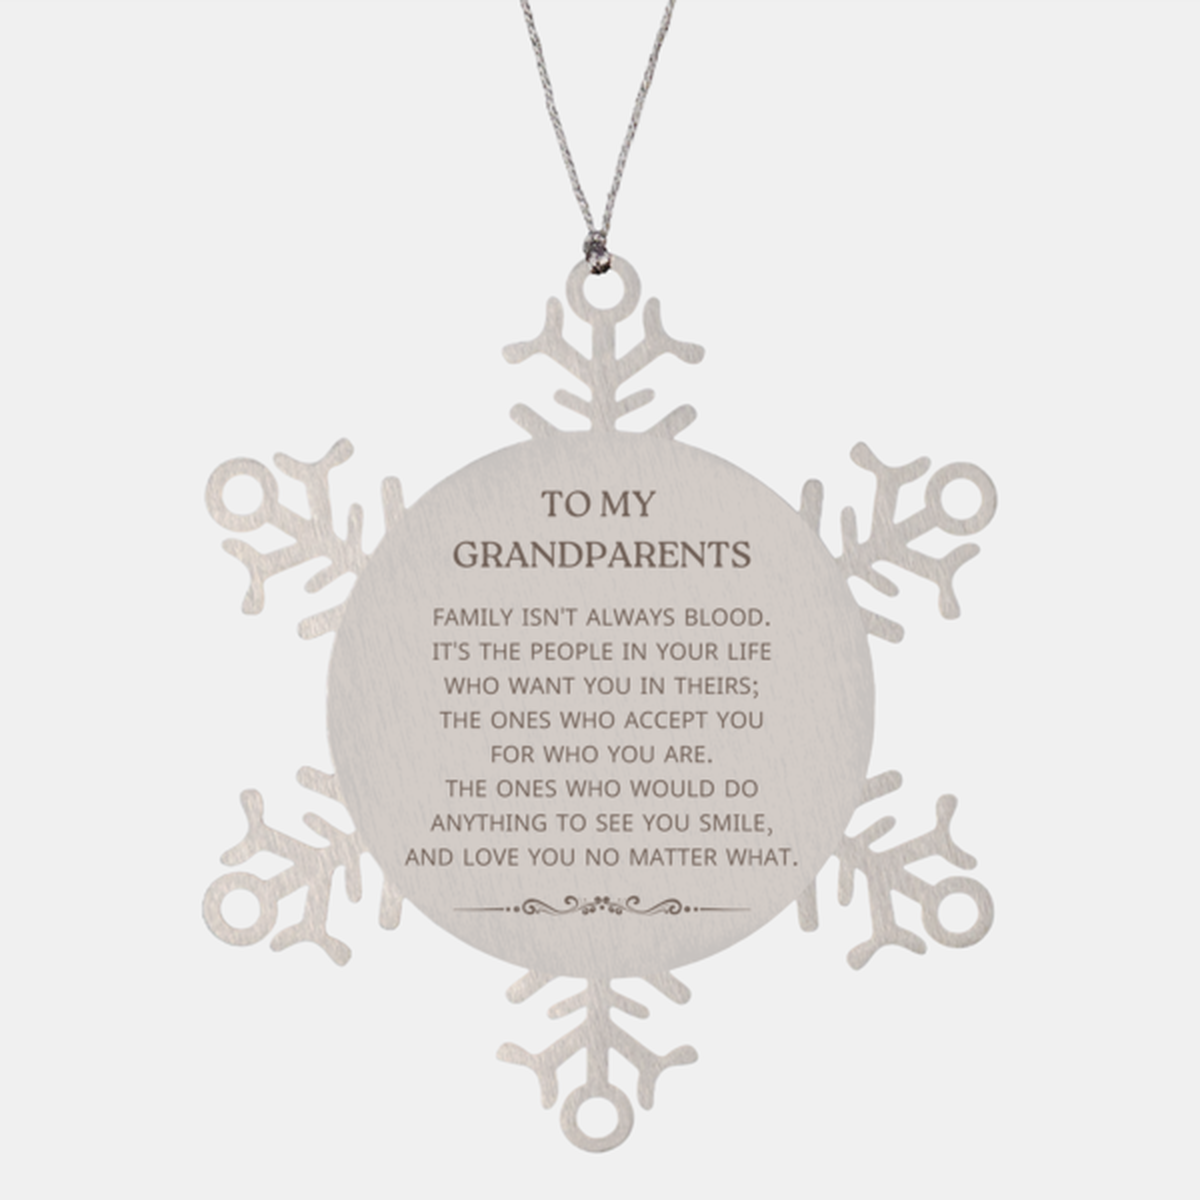 To My Grandparents Gifts, Family isn't always blood, Grandparents Snowflake Ornament, Birthday Christmas Unique Present For Grandparents